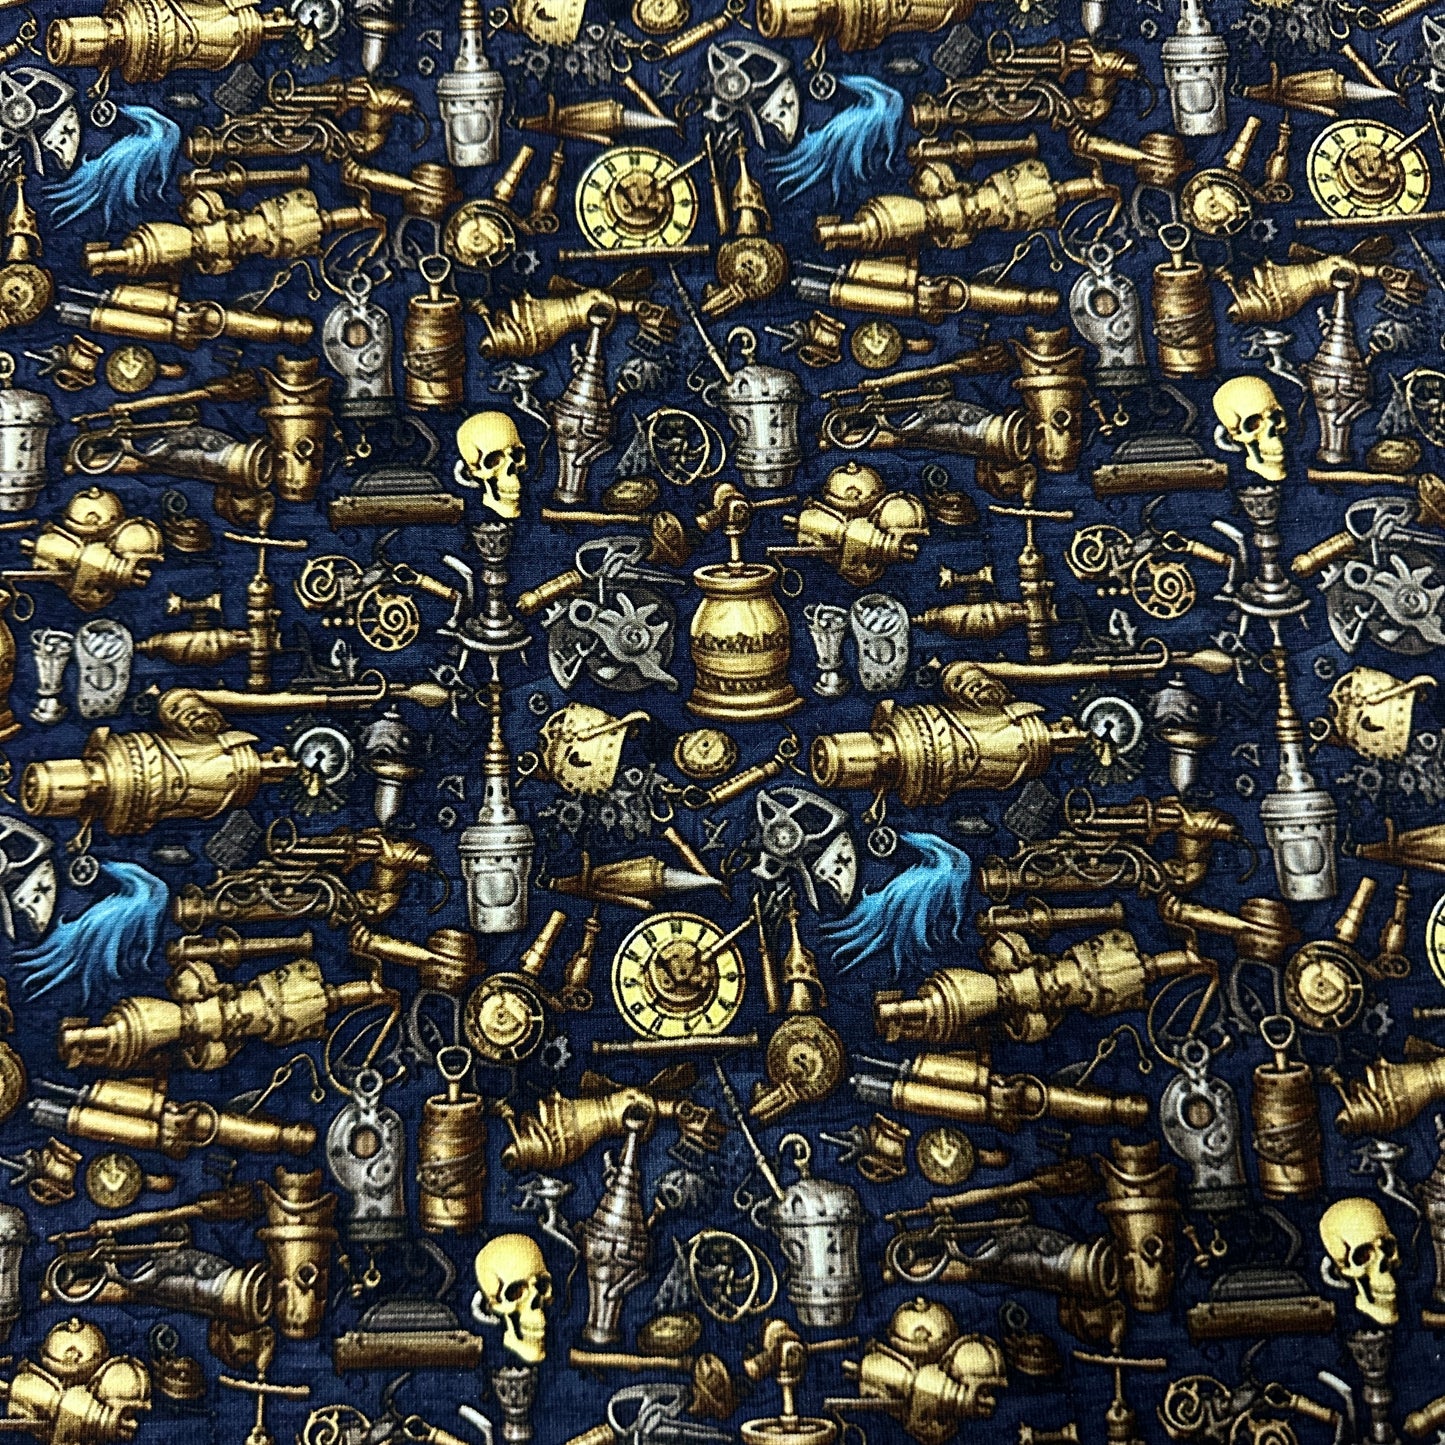 Pirate Weapons on Organic Cotton/Spandex Jersey Fabric